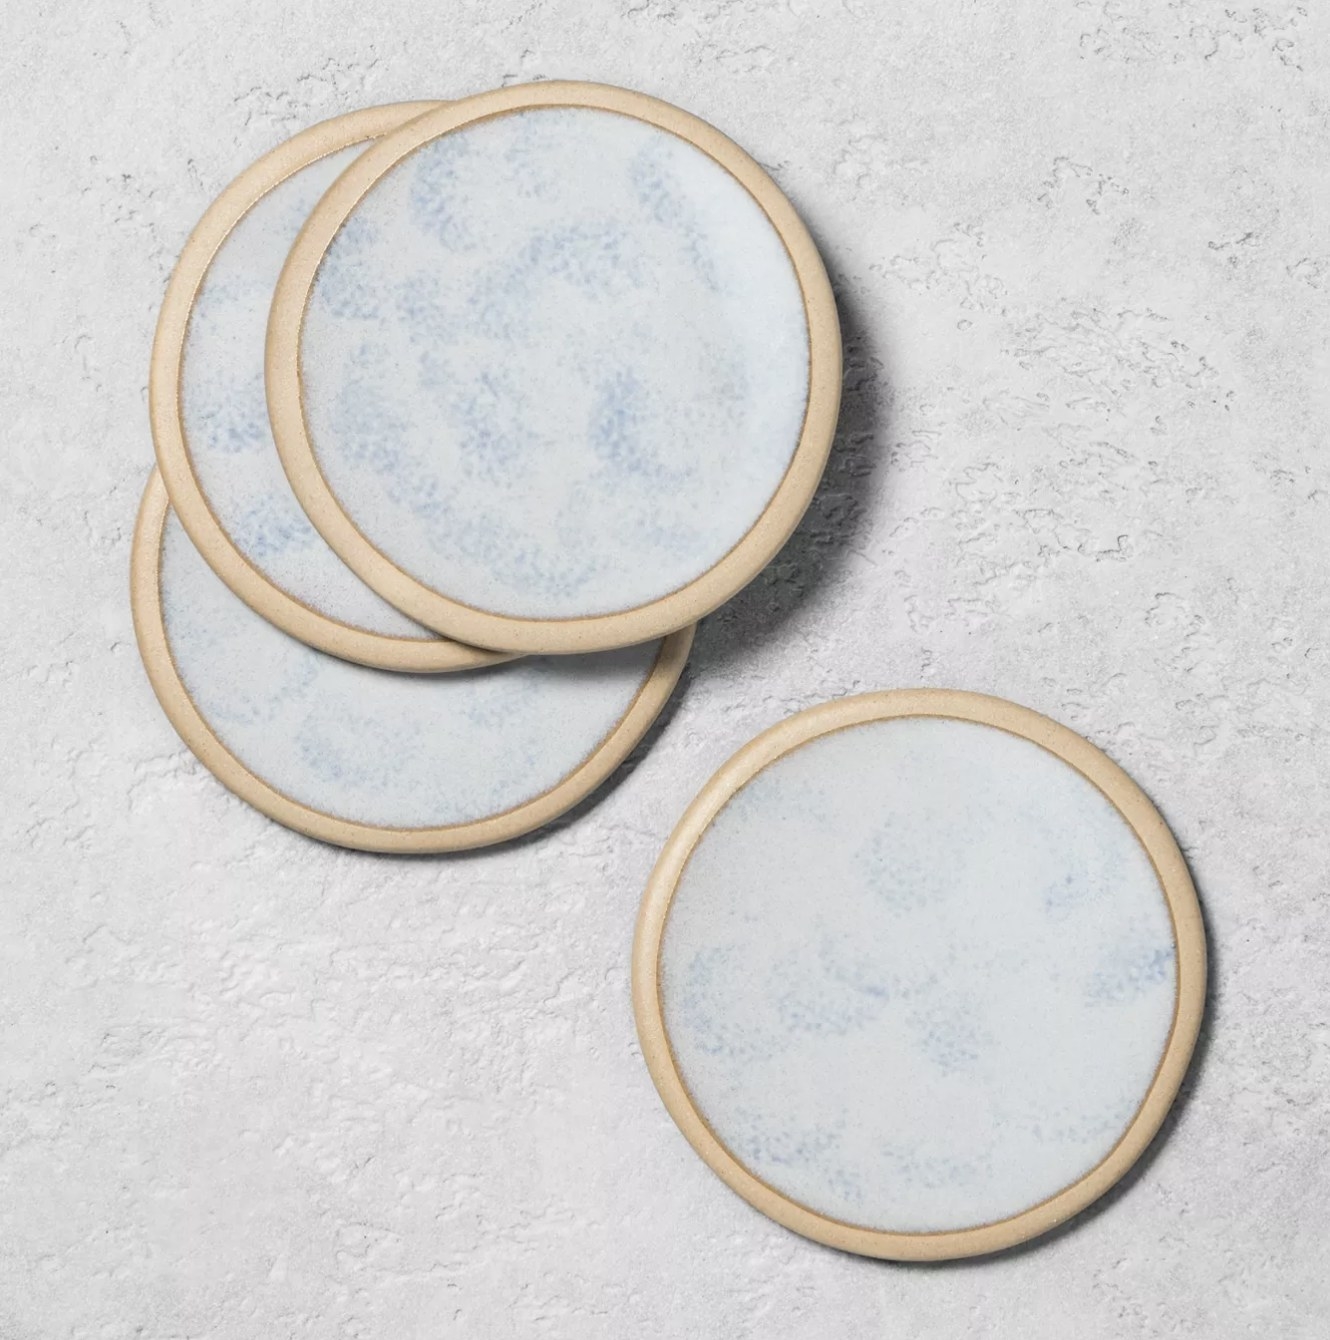 The round marble coasters